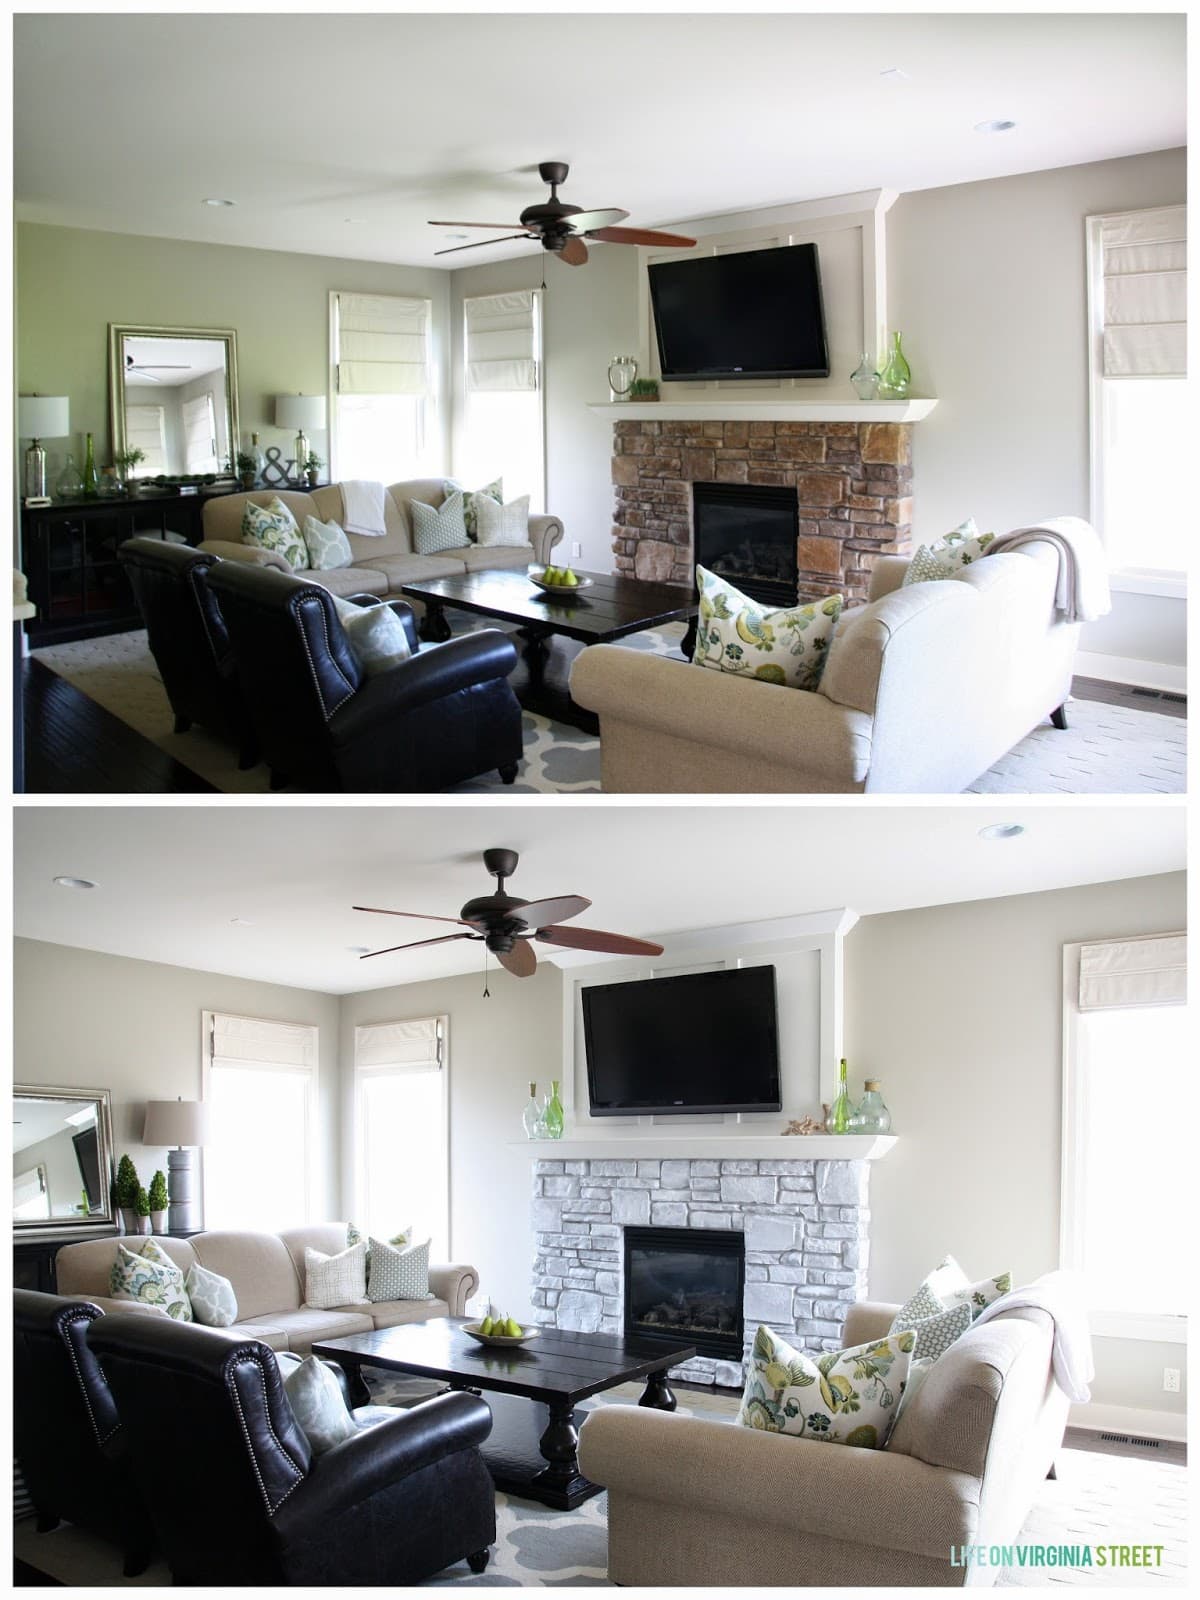 Before and after- complete transformation of the whitewashed fireplace.